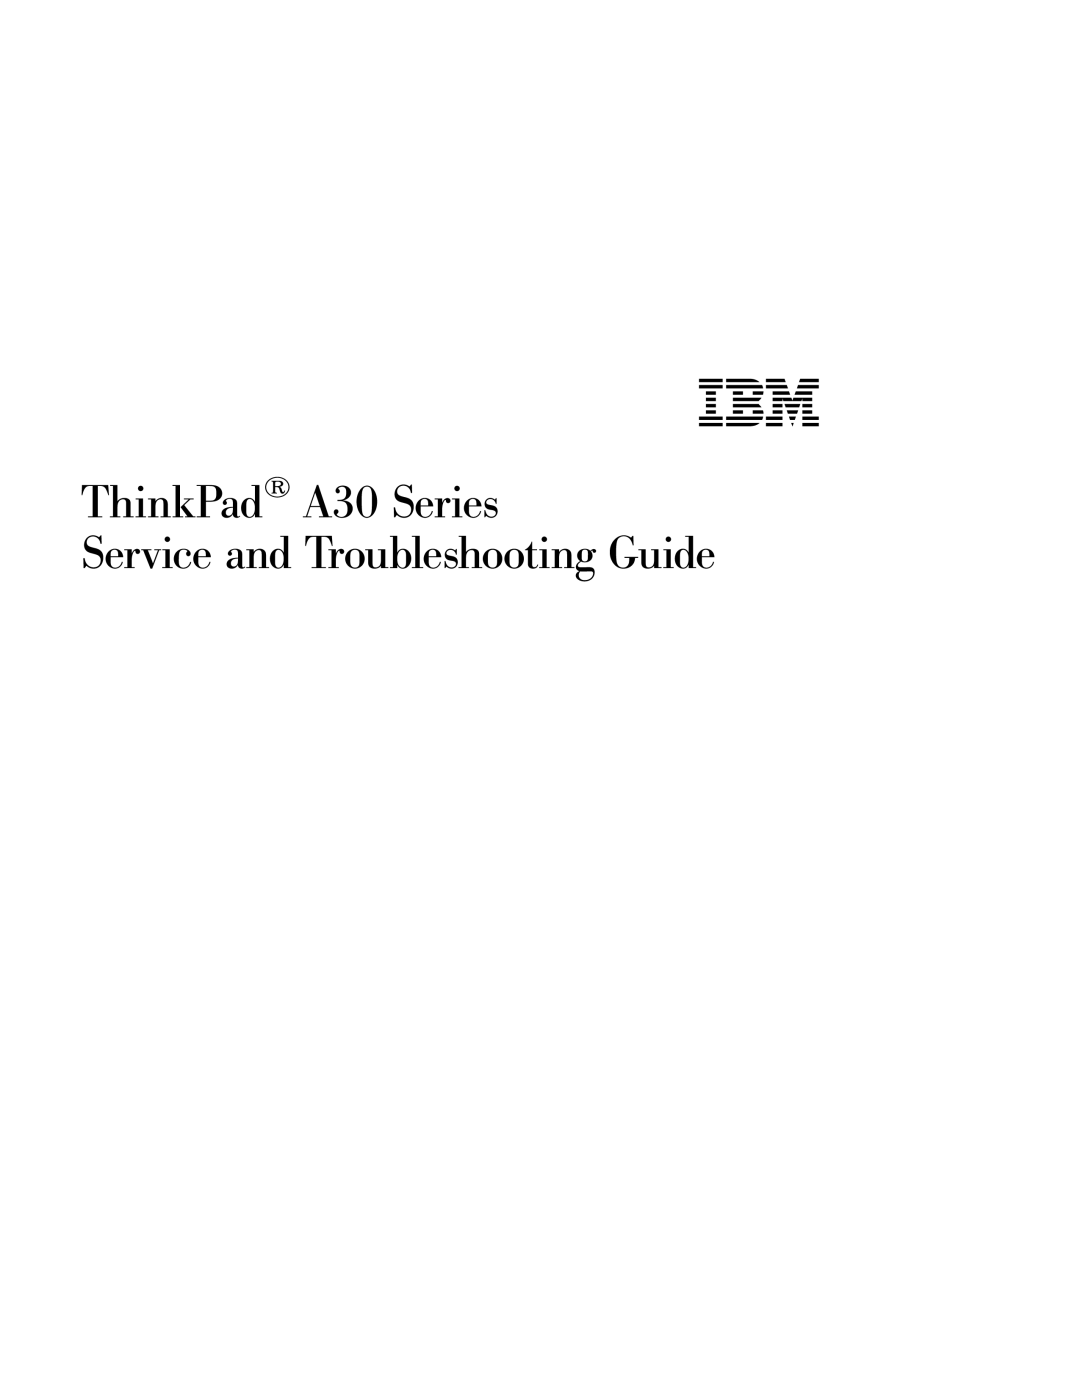 IBM manual ThinkPad A30 Series Service and Troubleshooting Guide 